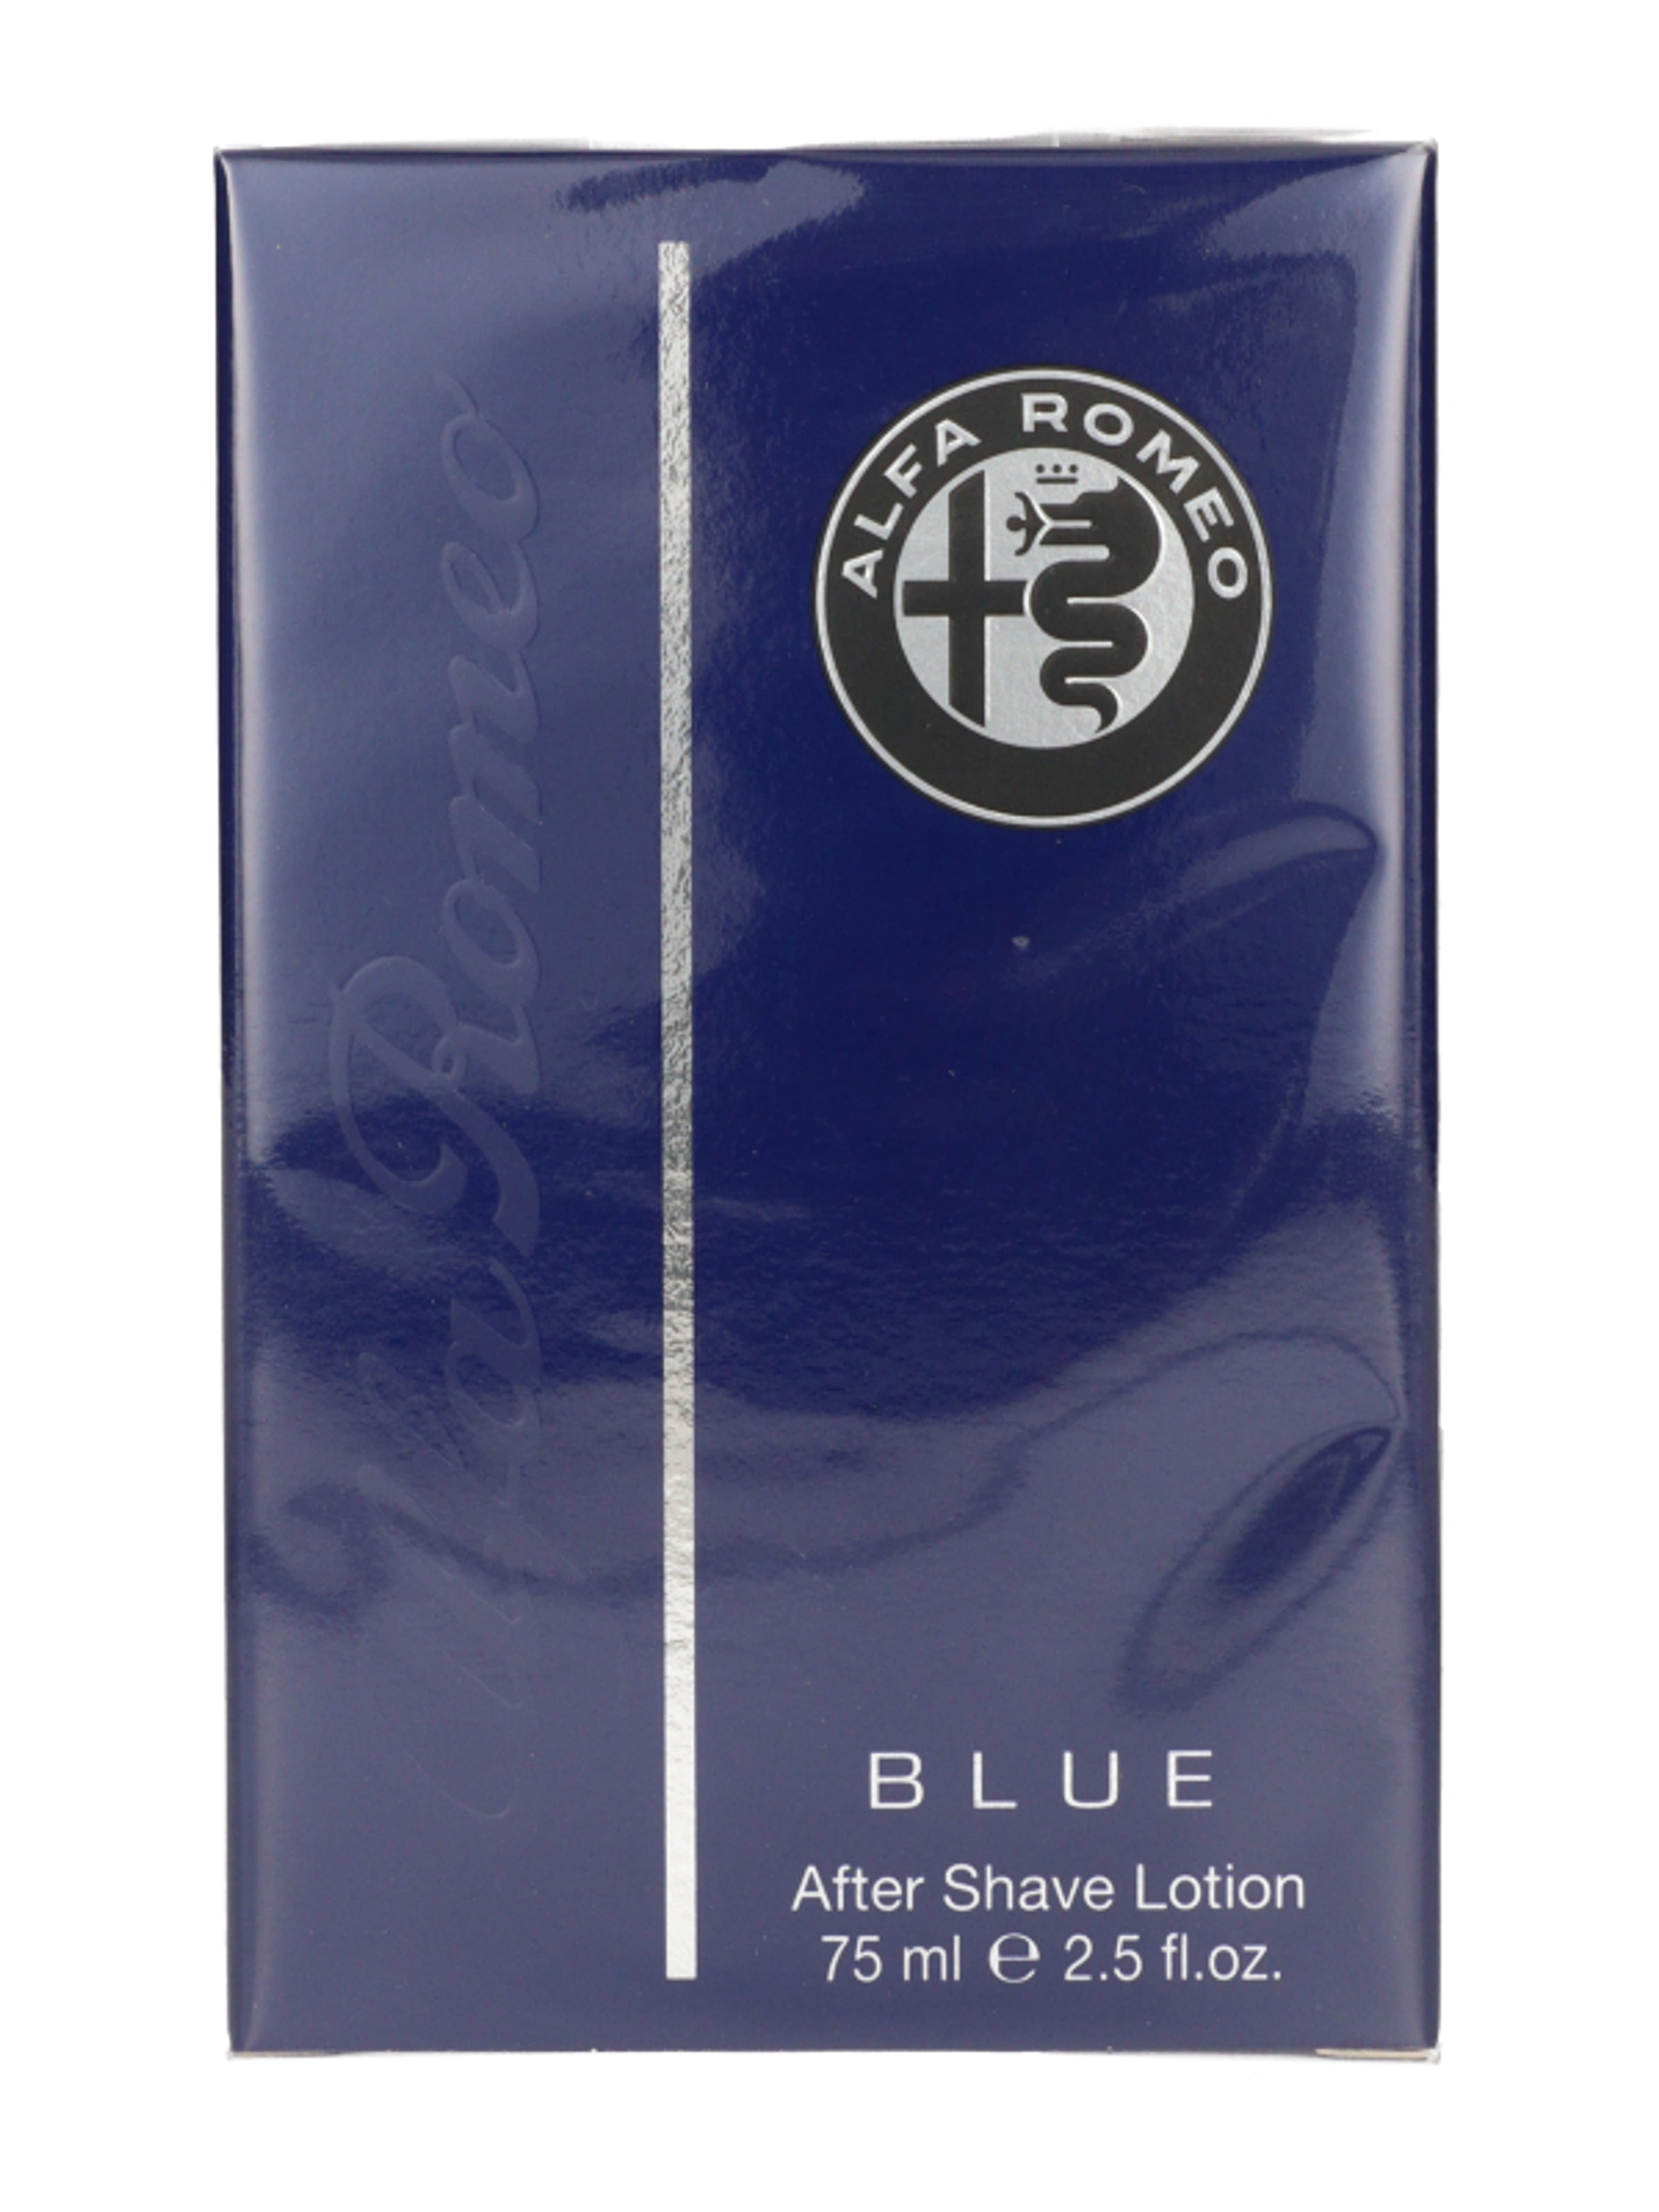 Alfa Romeo Blue After Shave Lotion - 75 ml